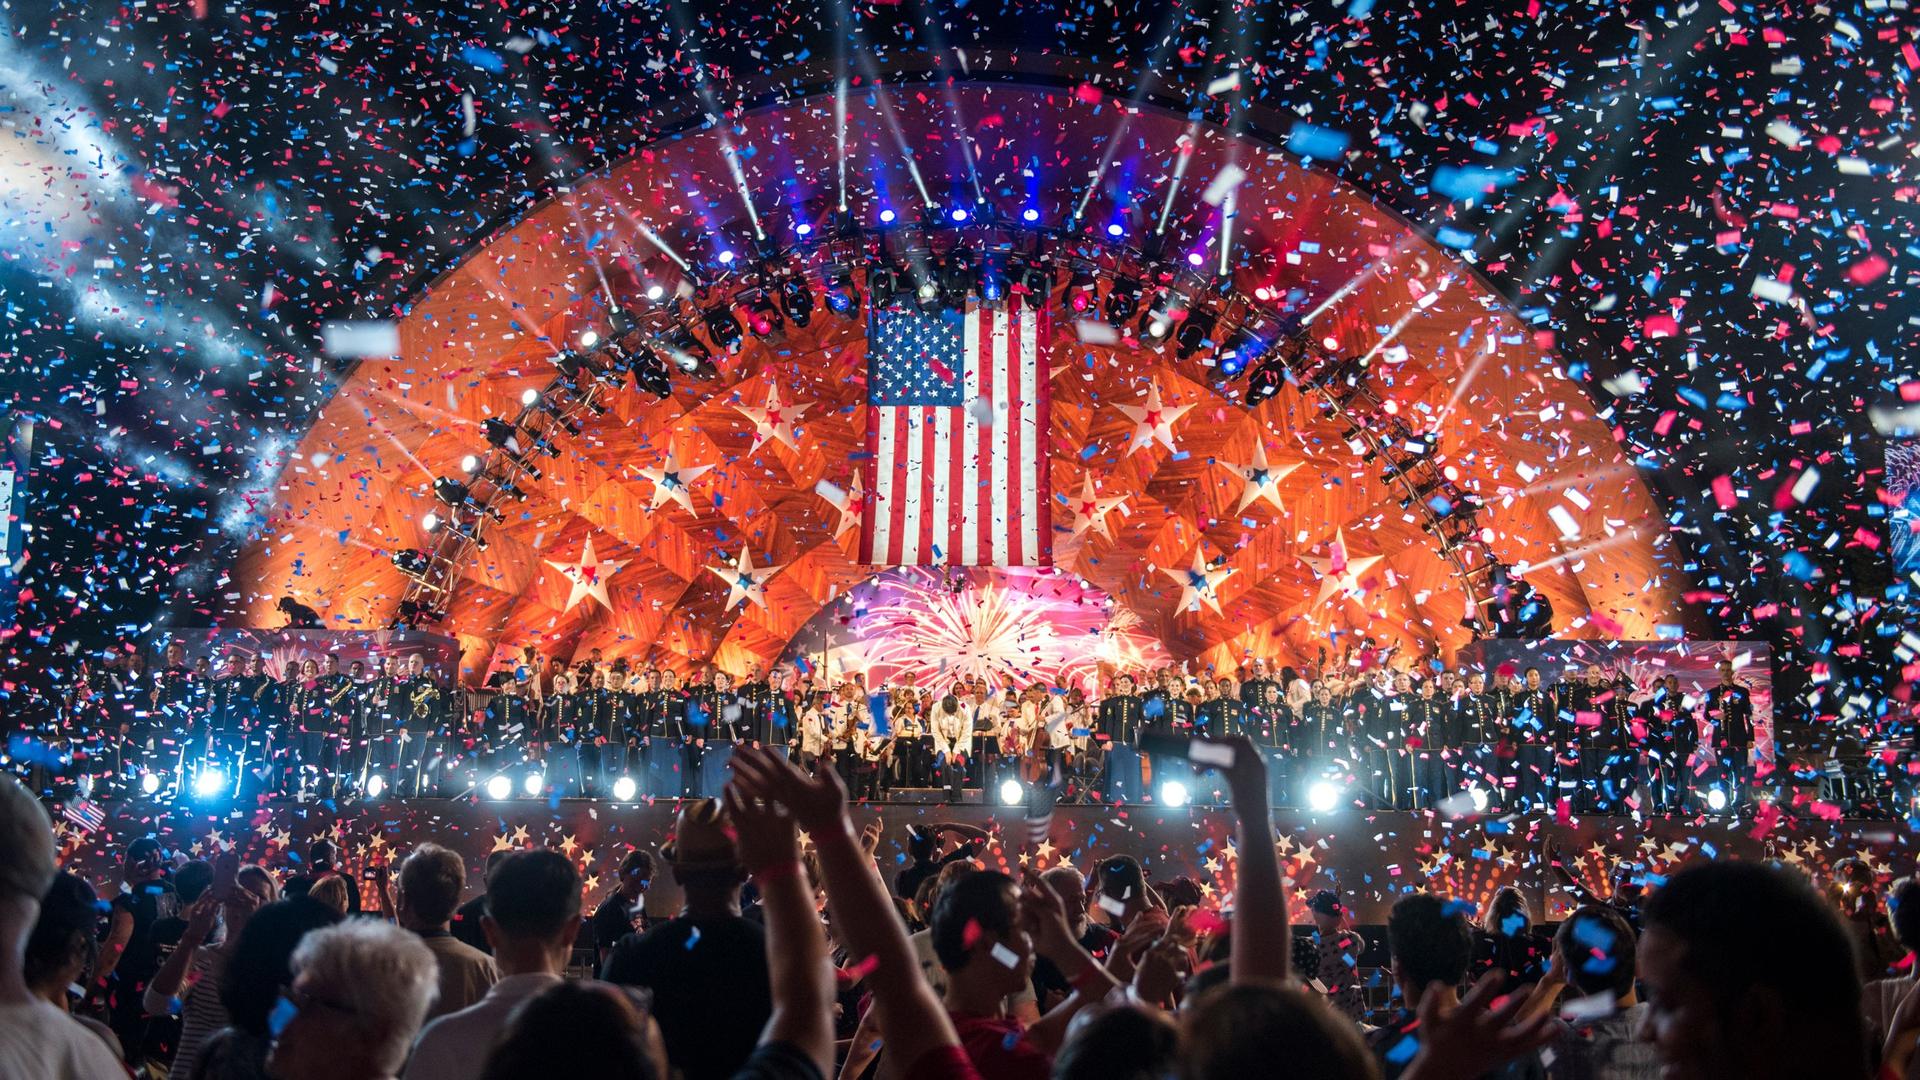 A crowd watches an illuminated bandshell decorated with red and blue stars while confetti falls in the air.